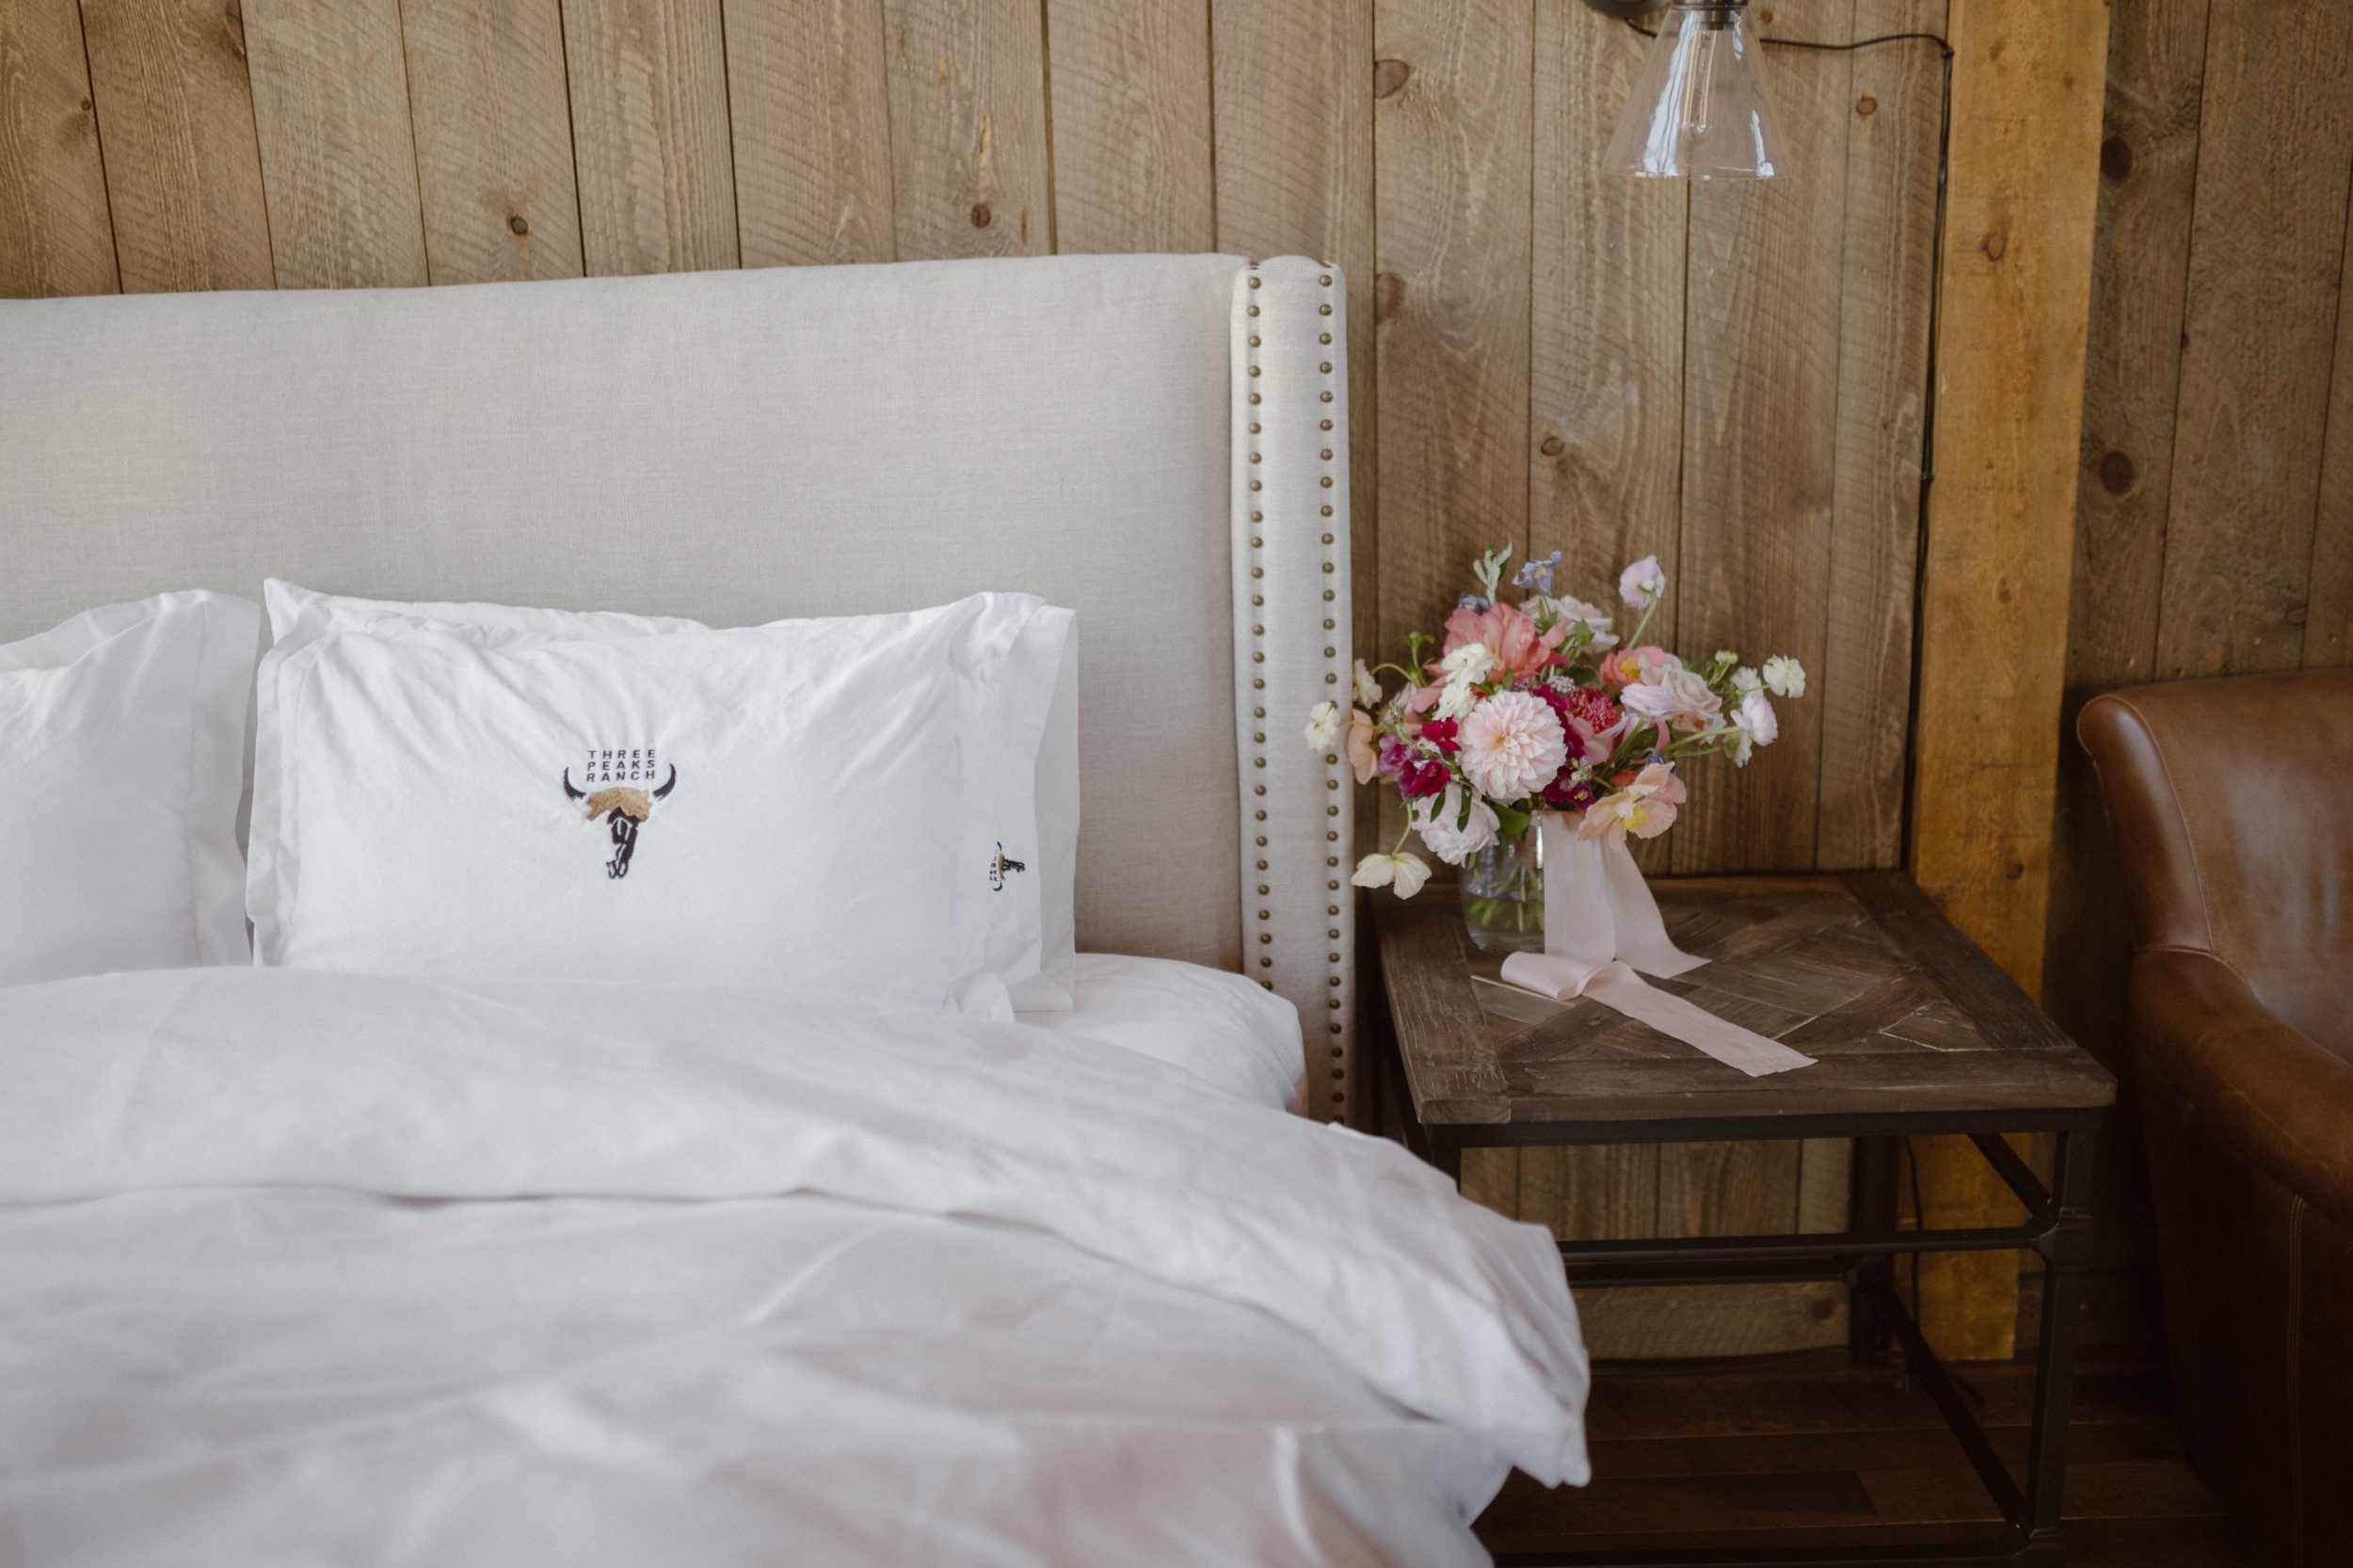 A photo of a wedding bouquet on a bedside table next to a white linen-covered bed at Three Peaks Ranch. Photo by Ashley Joyce.